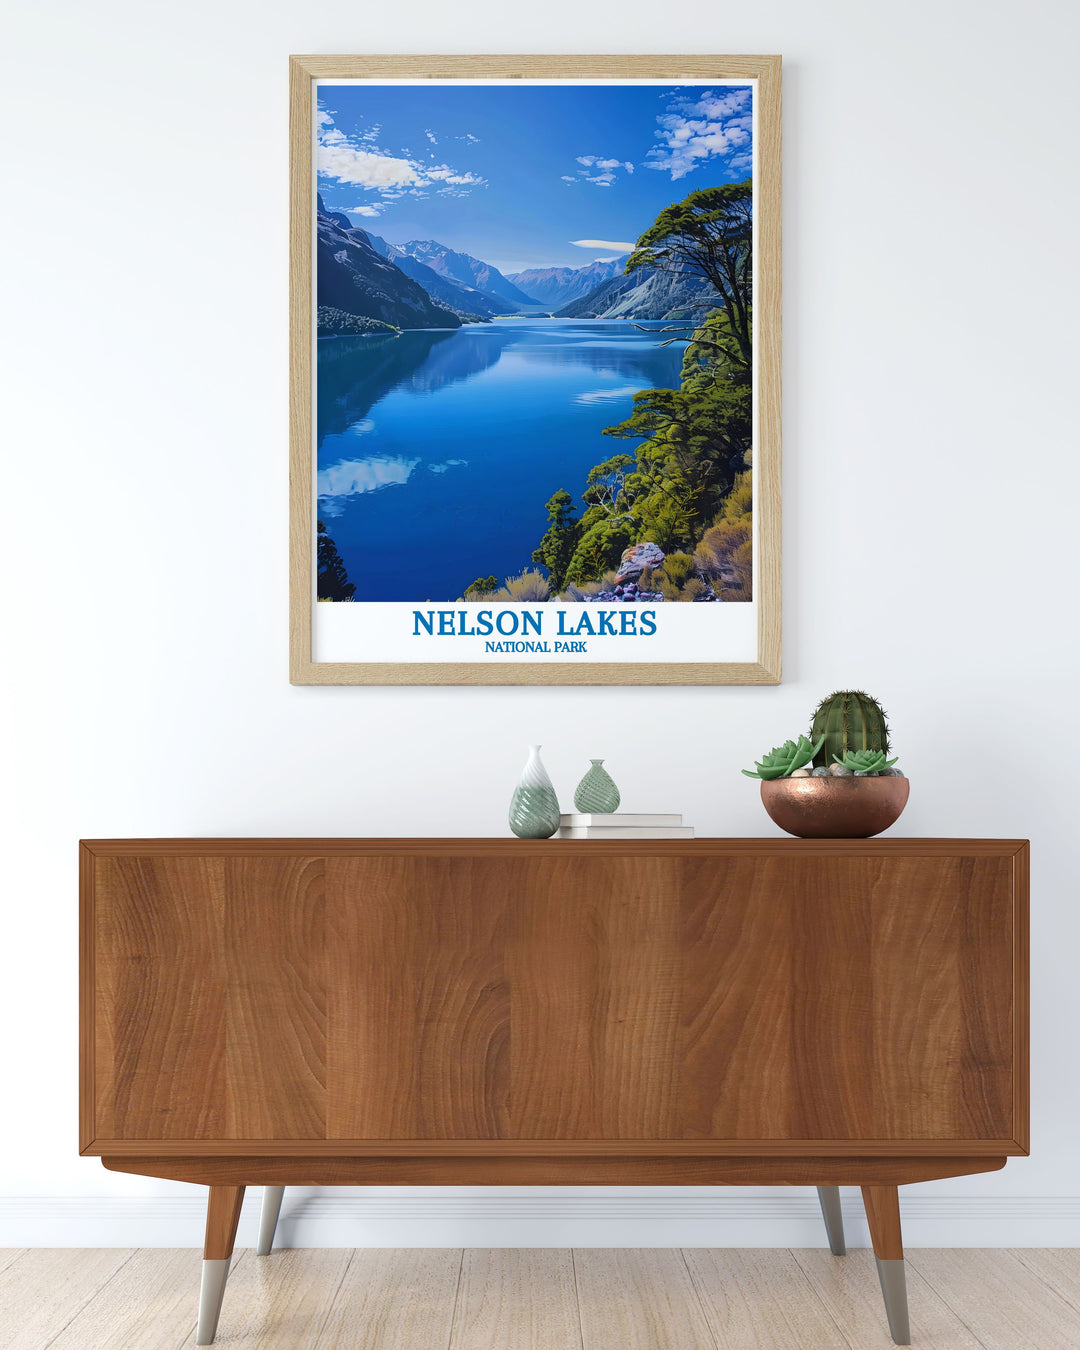 Beautiful framed print of Nelson Lakes National Park, highlighting the majestic mountains and tranquil lakes of New Zealand, ideal for nature enthusiasts and those looking to enhance their home decor with stunning visual art.